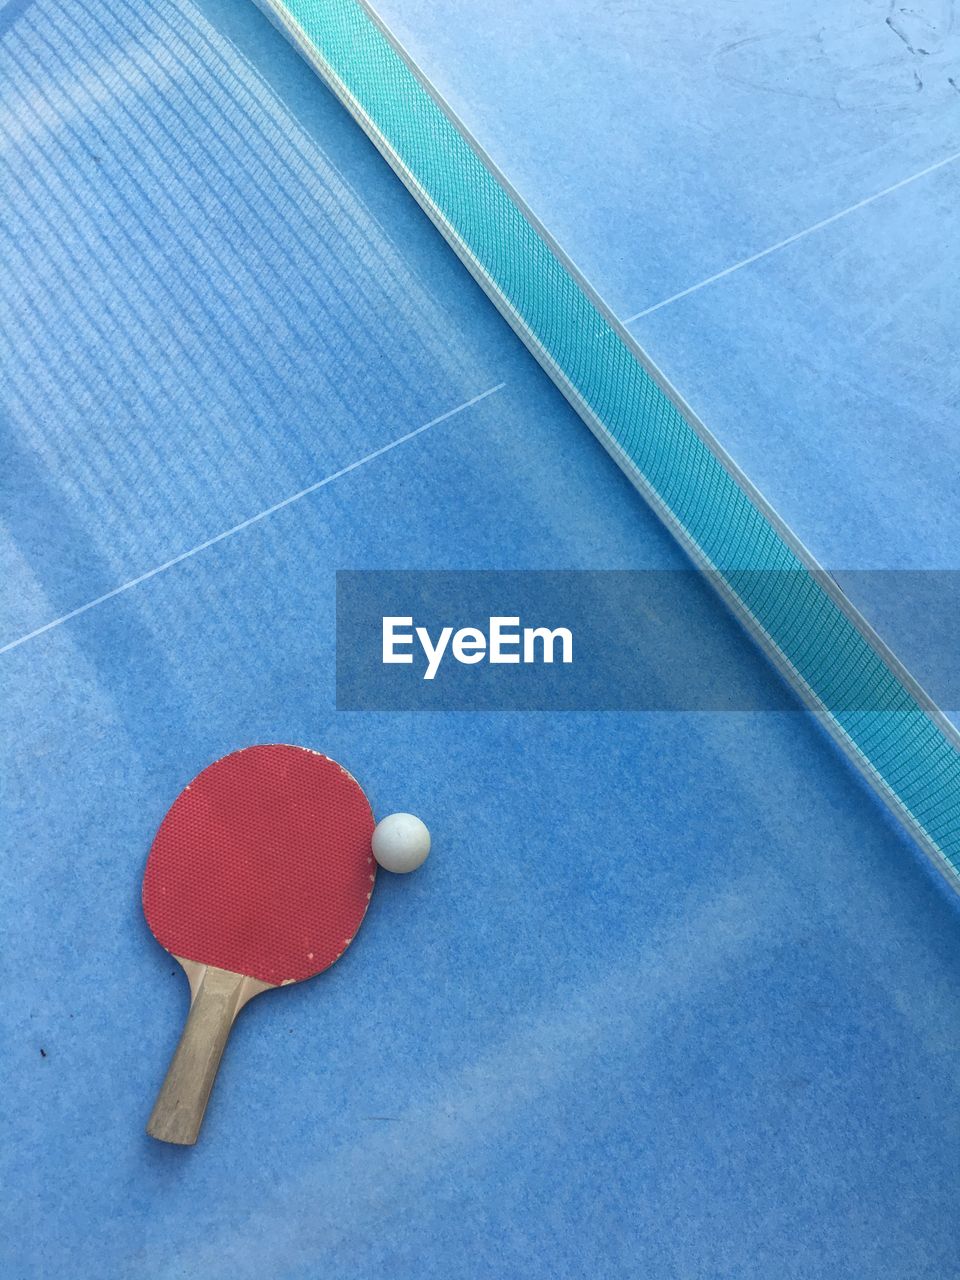 High angle view of table tennis racket with ball by net